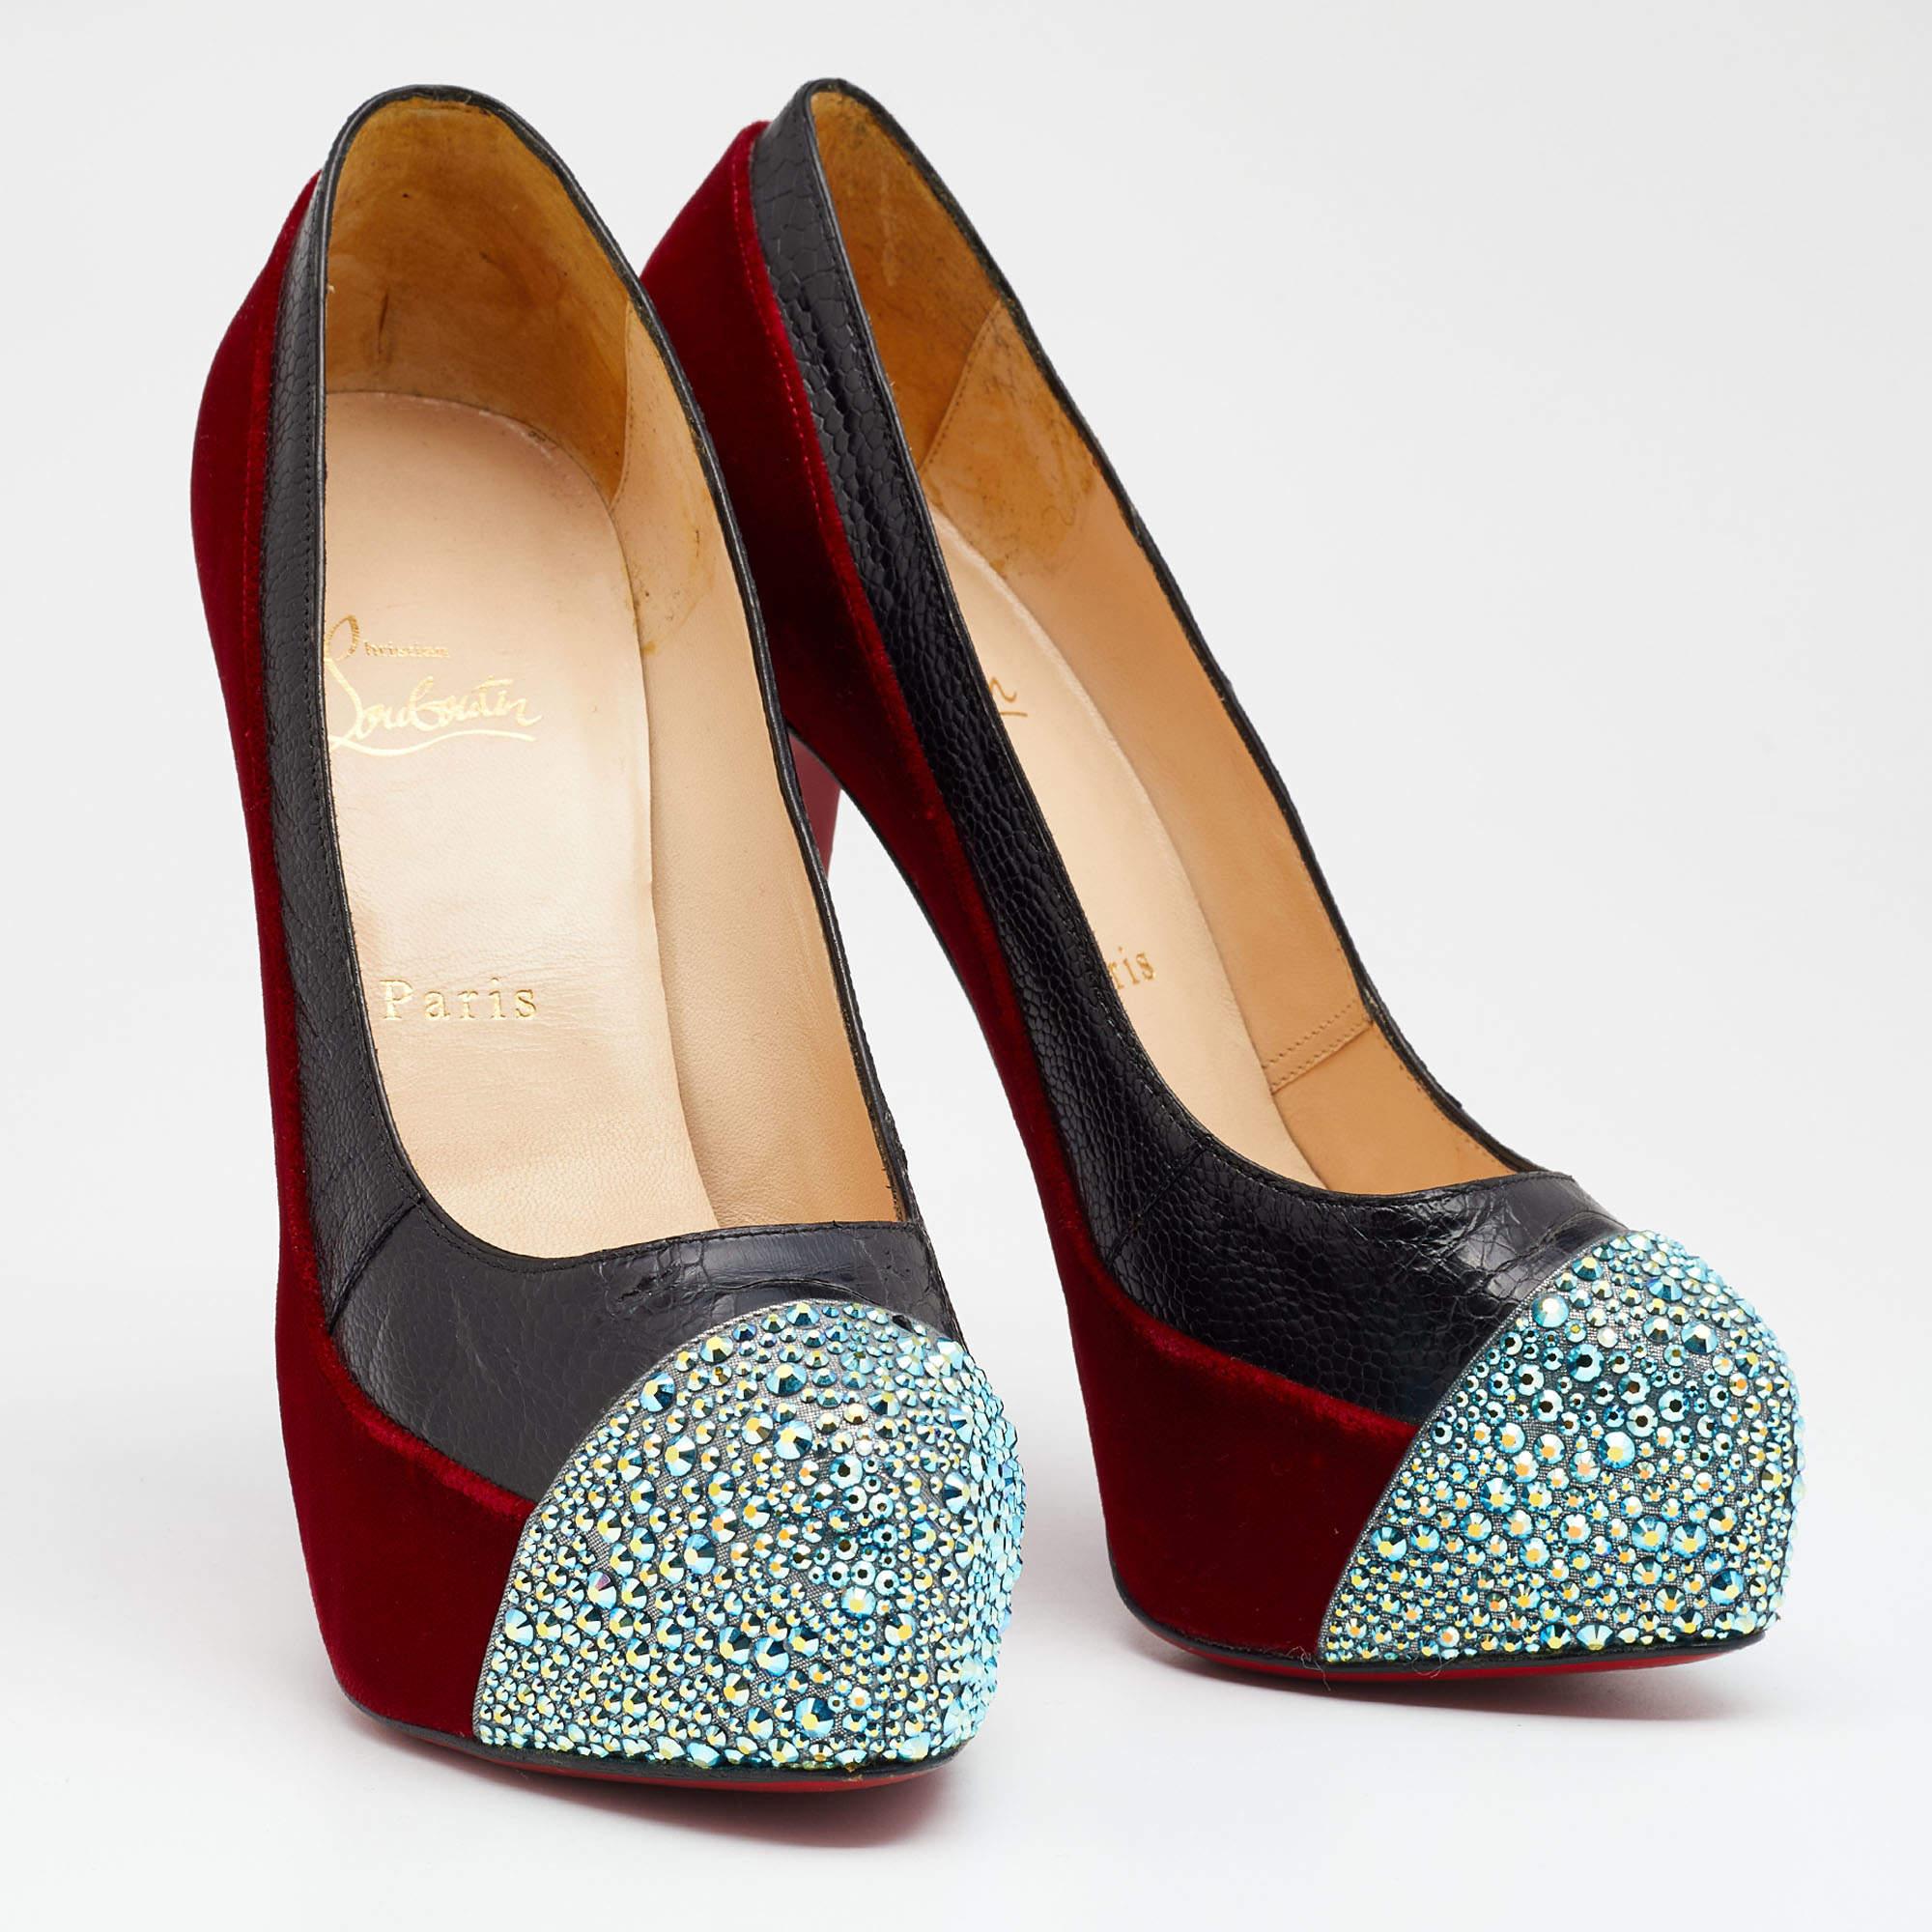 Create a shoe collection with timeless pairs so that you can wear them for a long time, no matter the season or trend. Choose pairs like this one by Christian Louboutin. It's a bold, sophisticated design with durable quality.

includes
Original